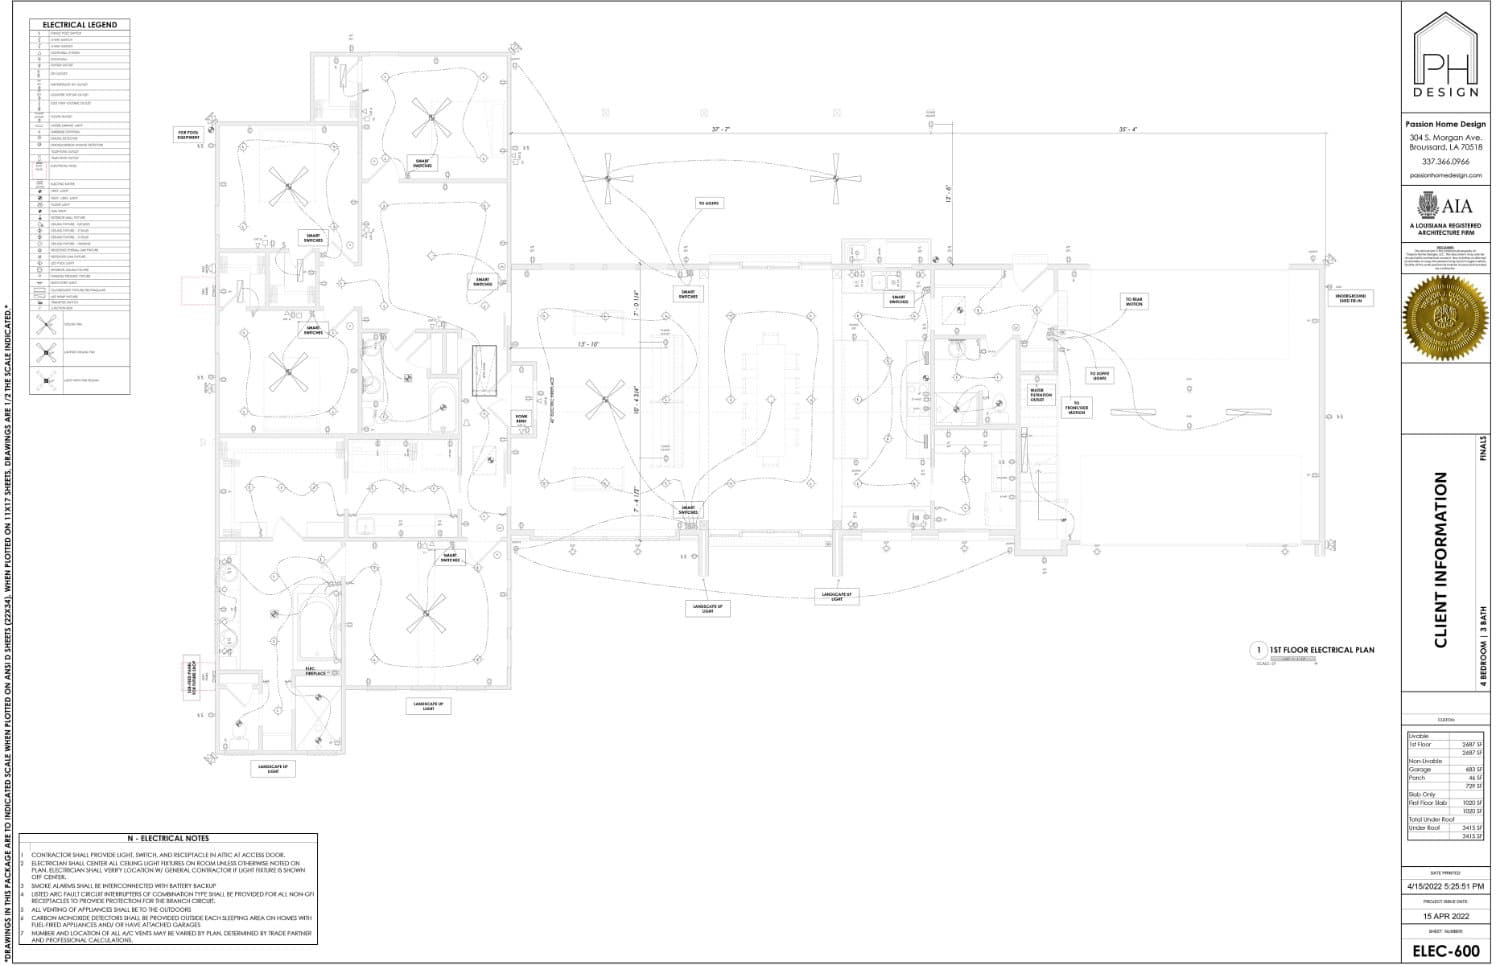 Electrical layout page of blueprint plans